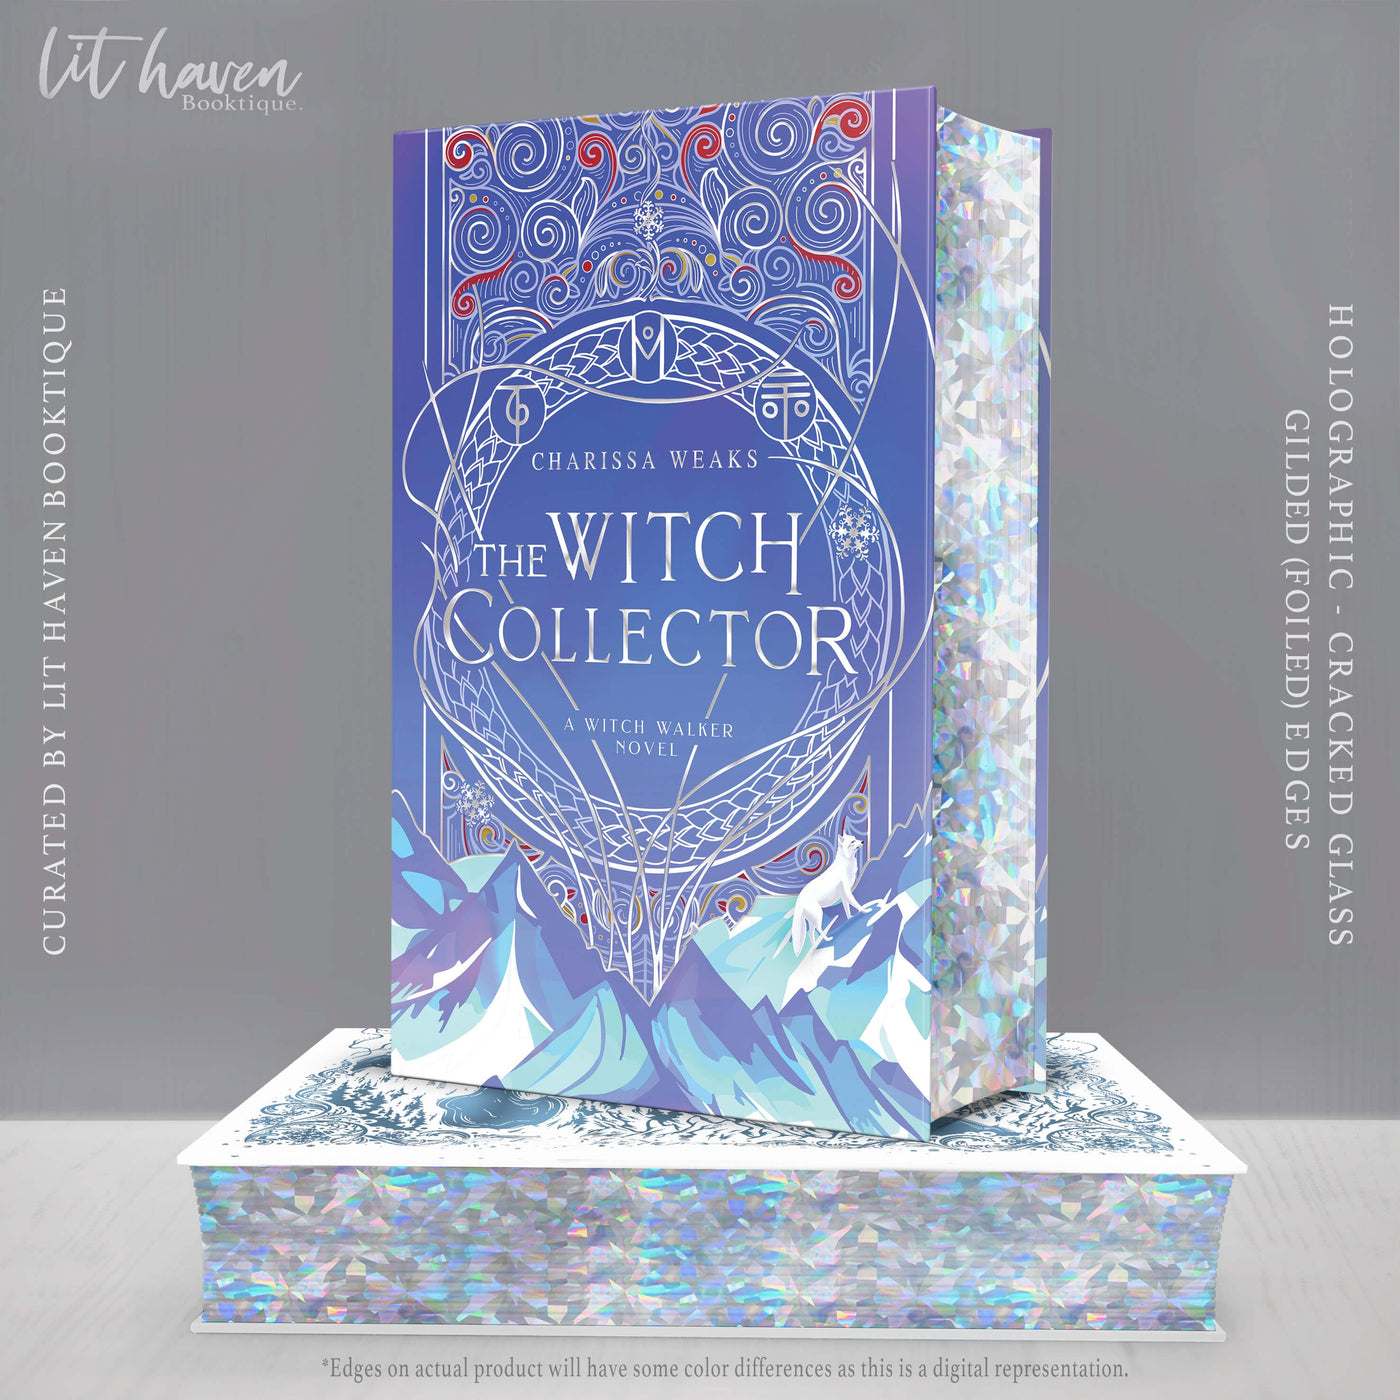 Lit Haven Booktique Book GILDED - Holographic Foiled Edges SIGNED TIP-IN | The Witch Collector Hardcover Preorder